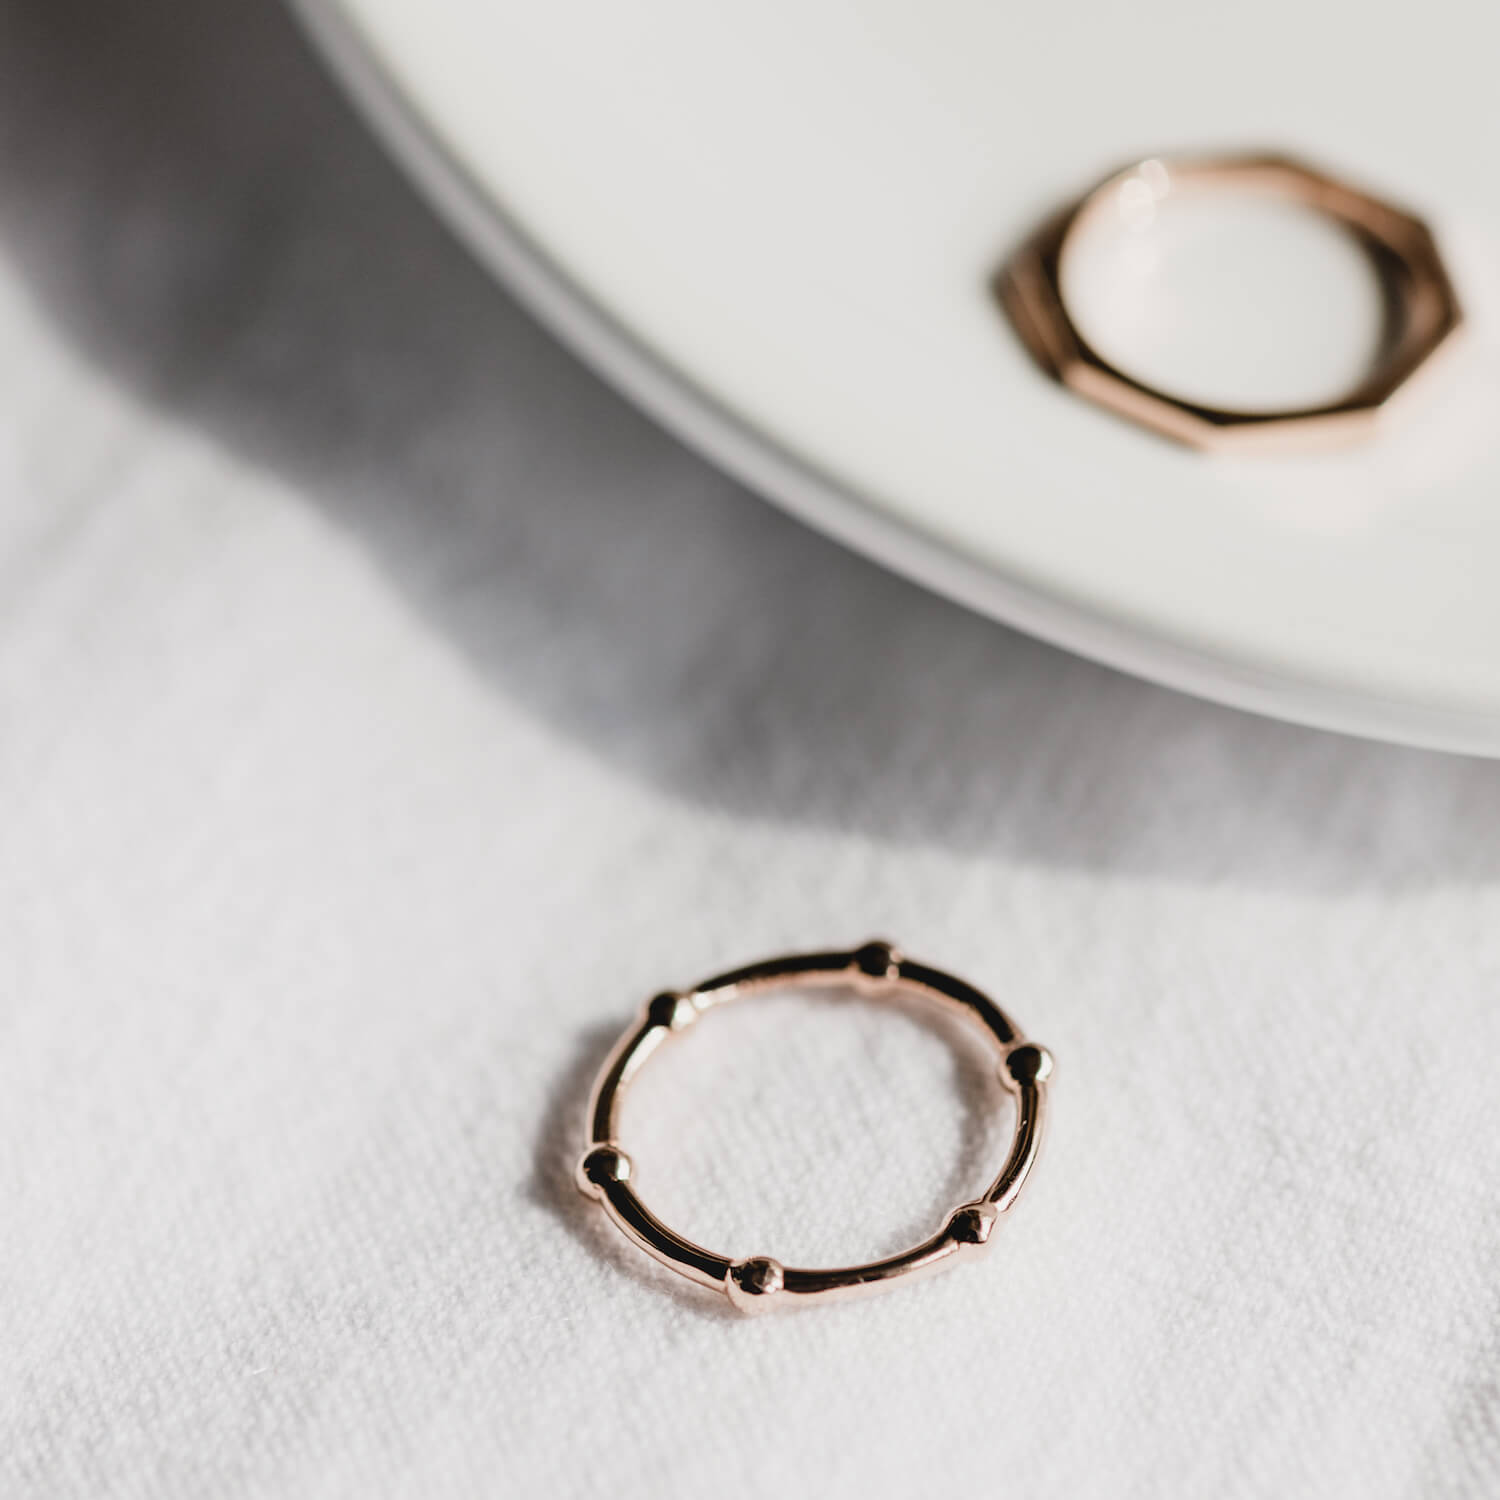 A beaded wire ring made from rose gold and a hexagonal shaped ring made from rose gold